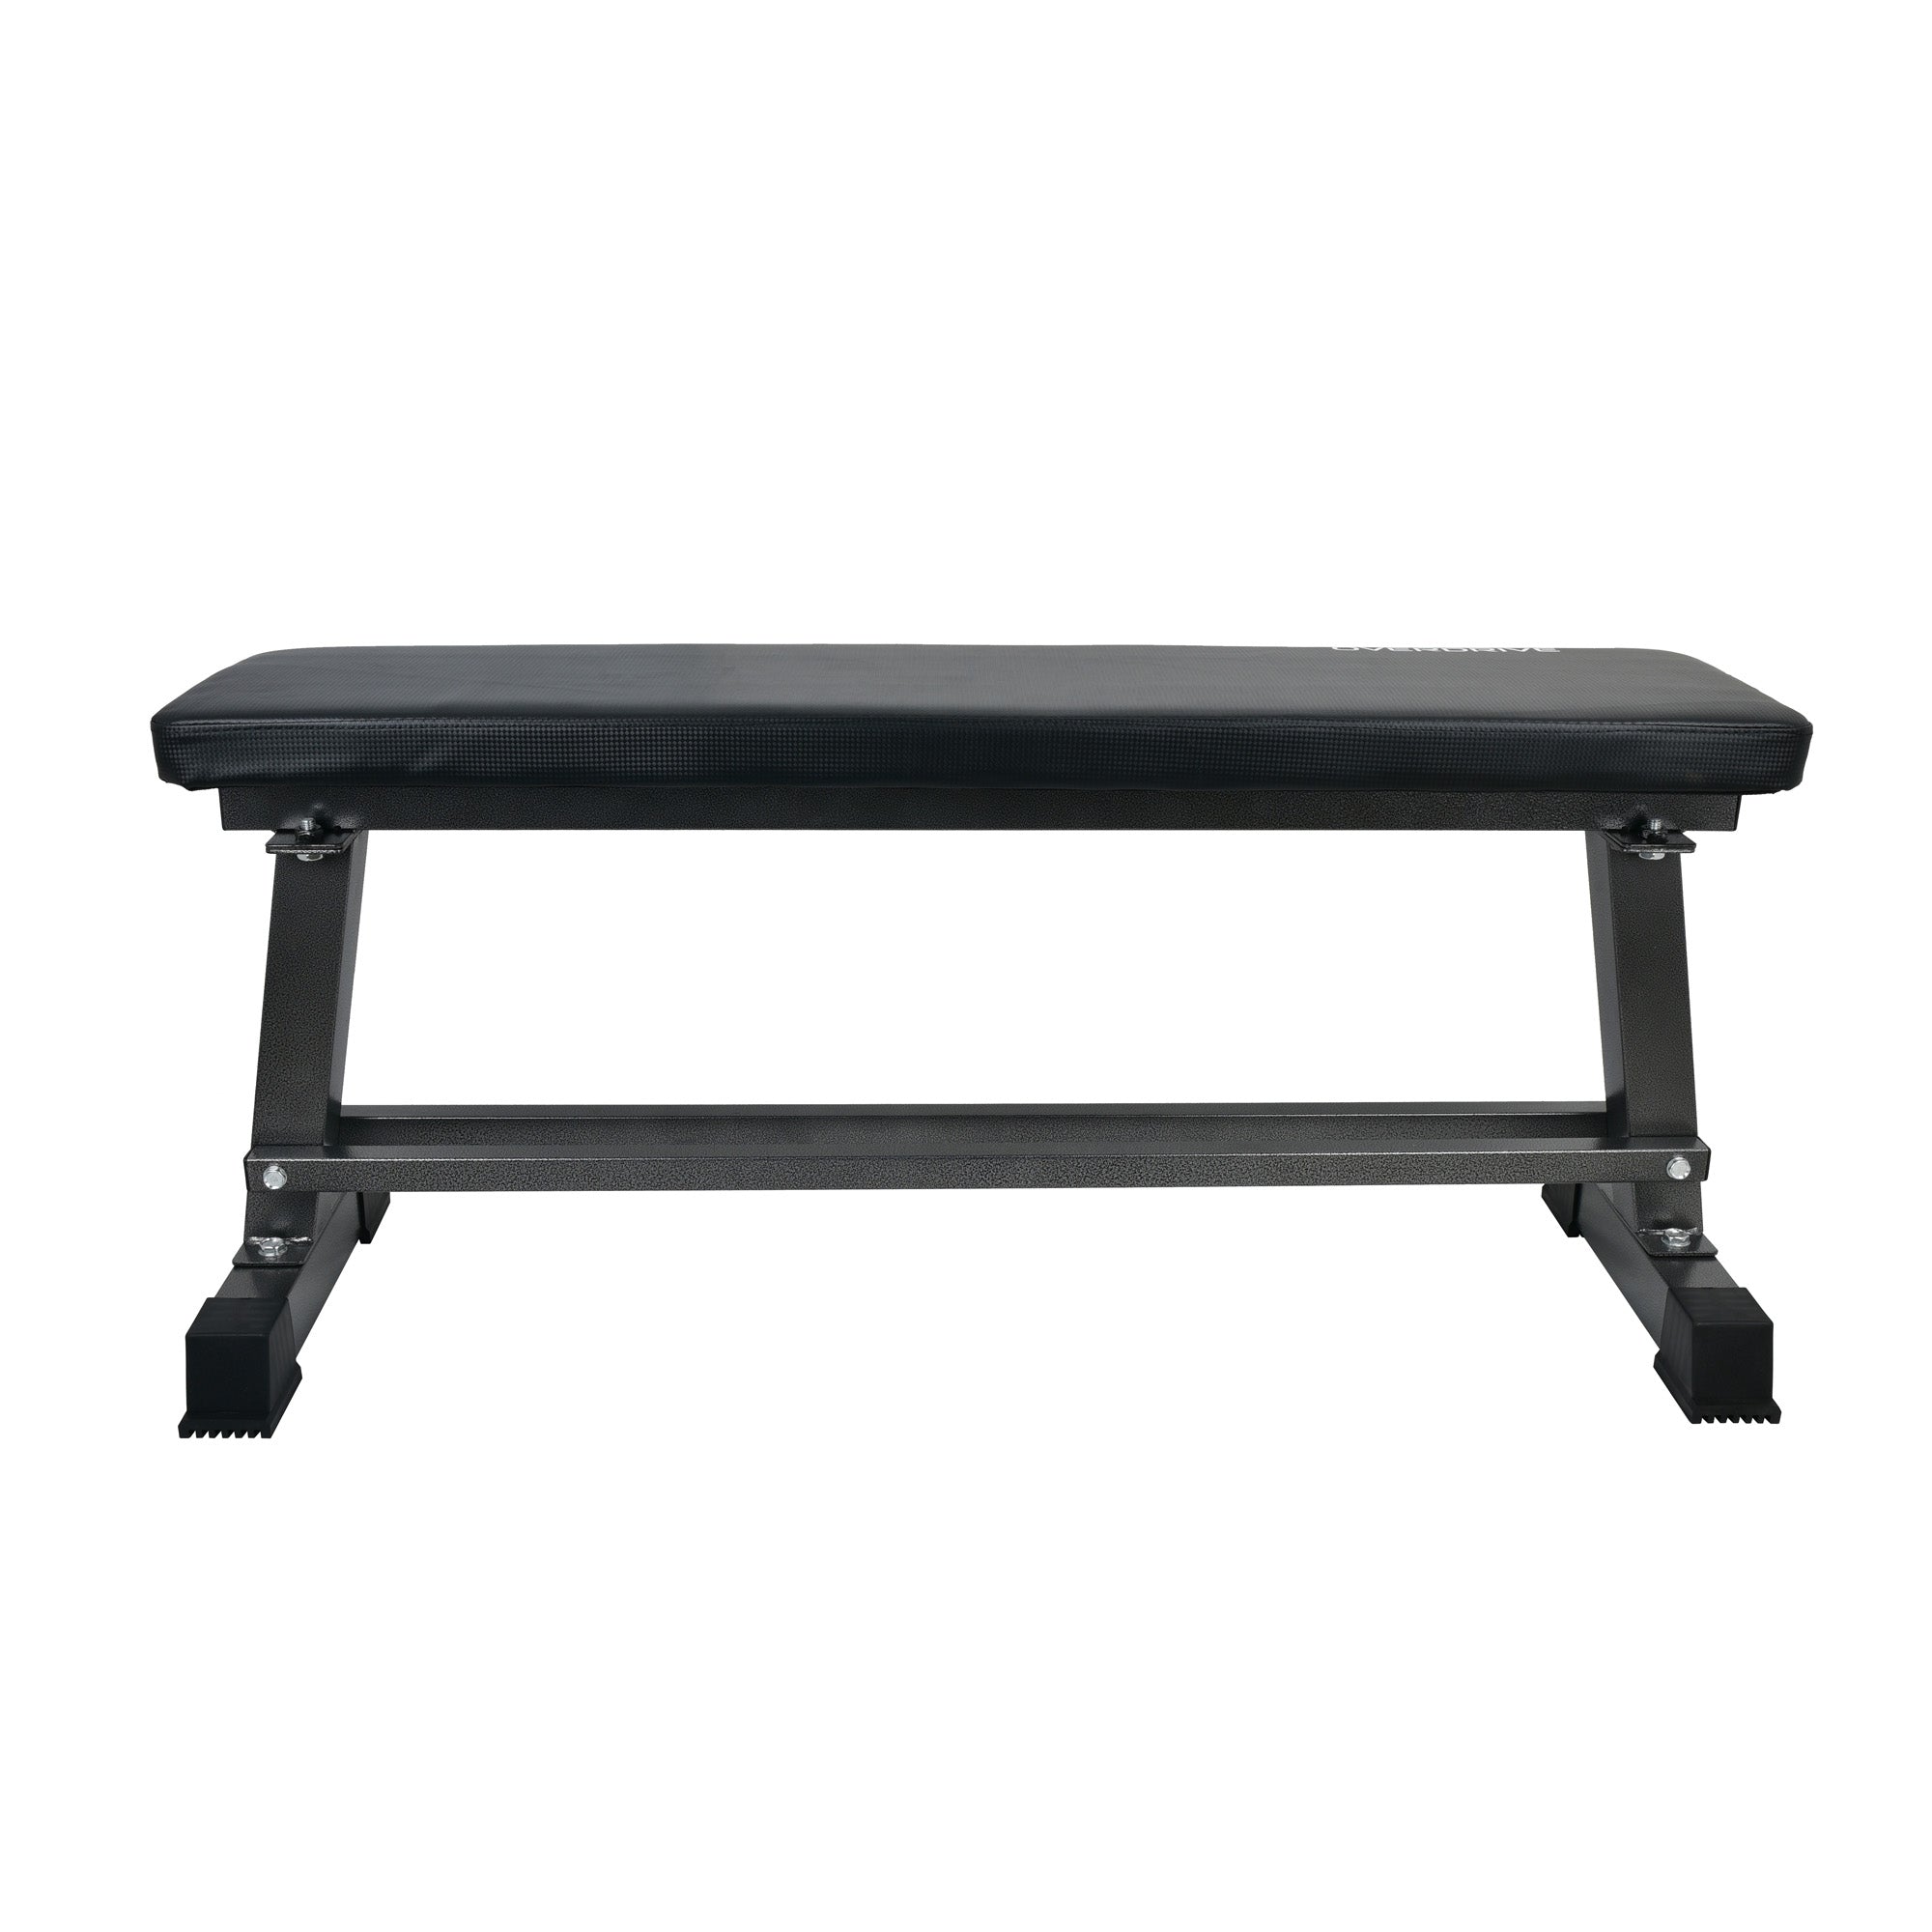 OVERDRIVE Flat Weight Bench